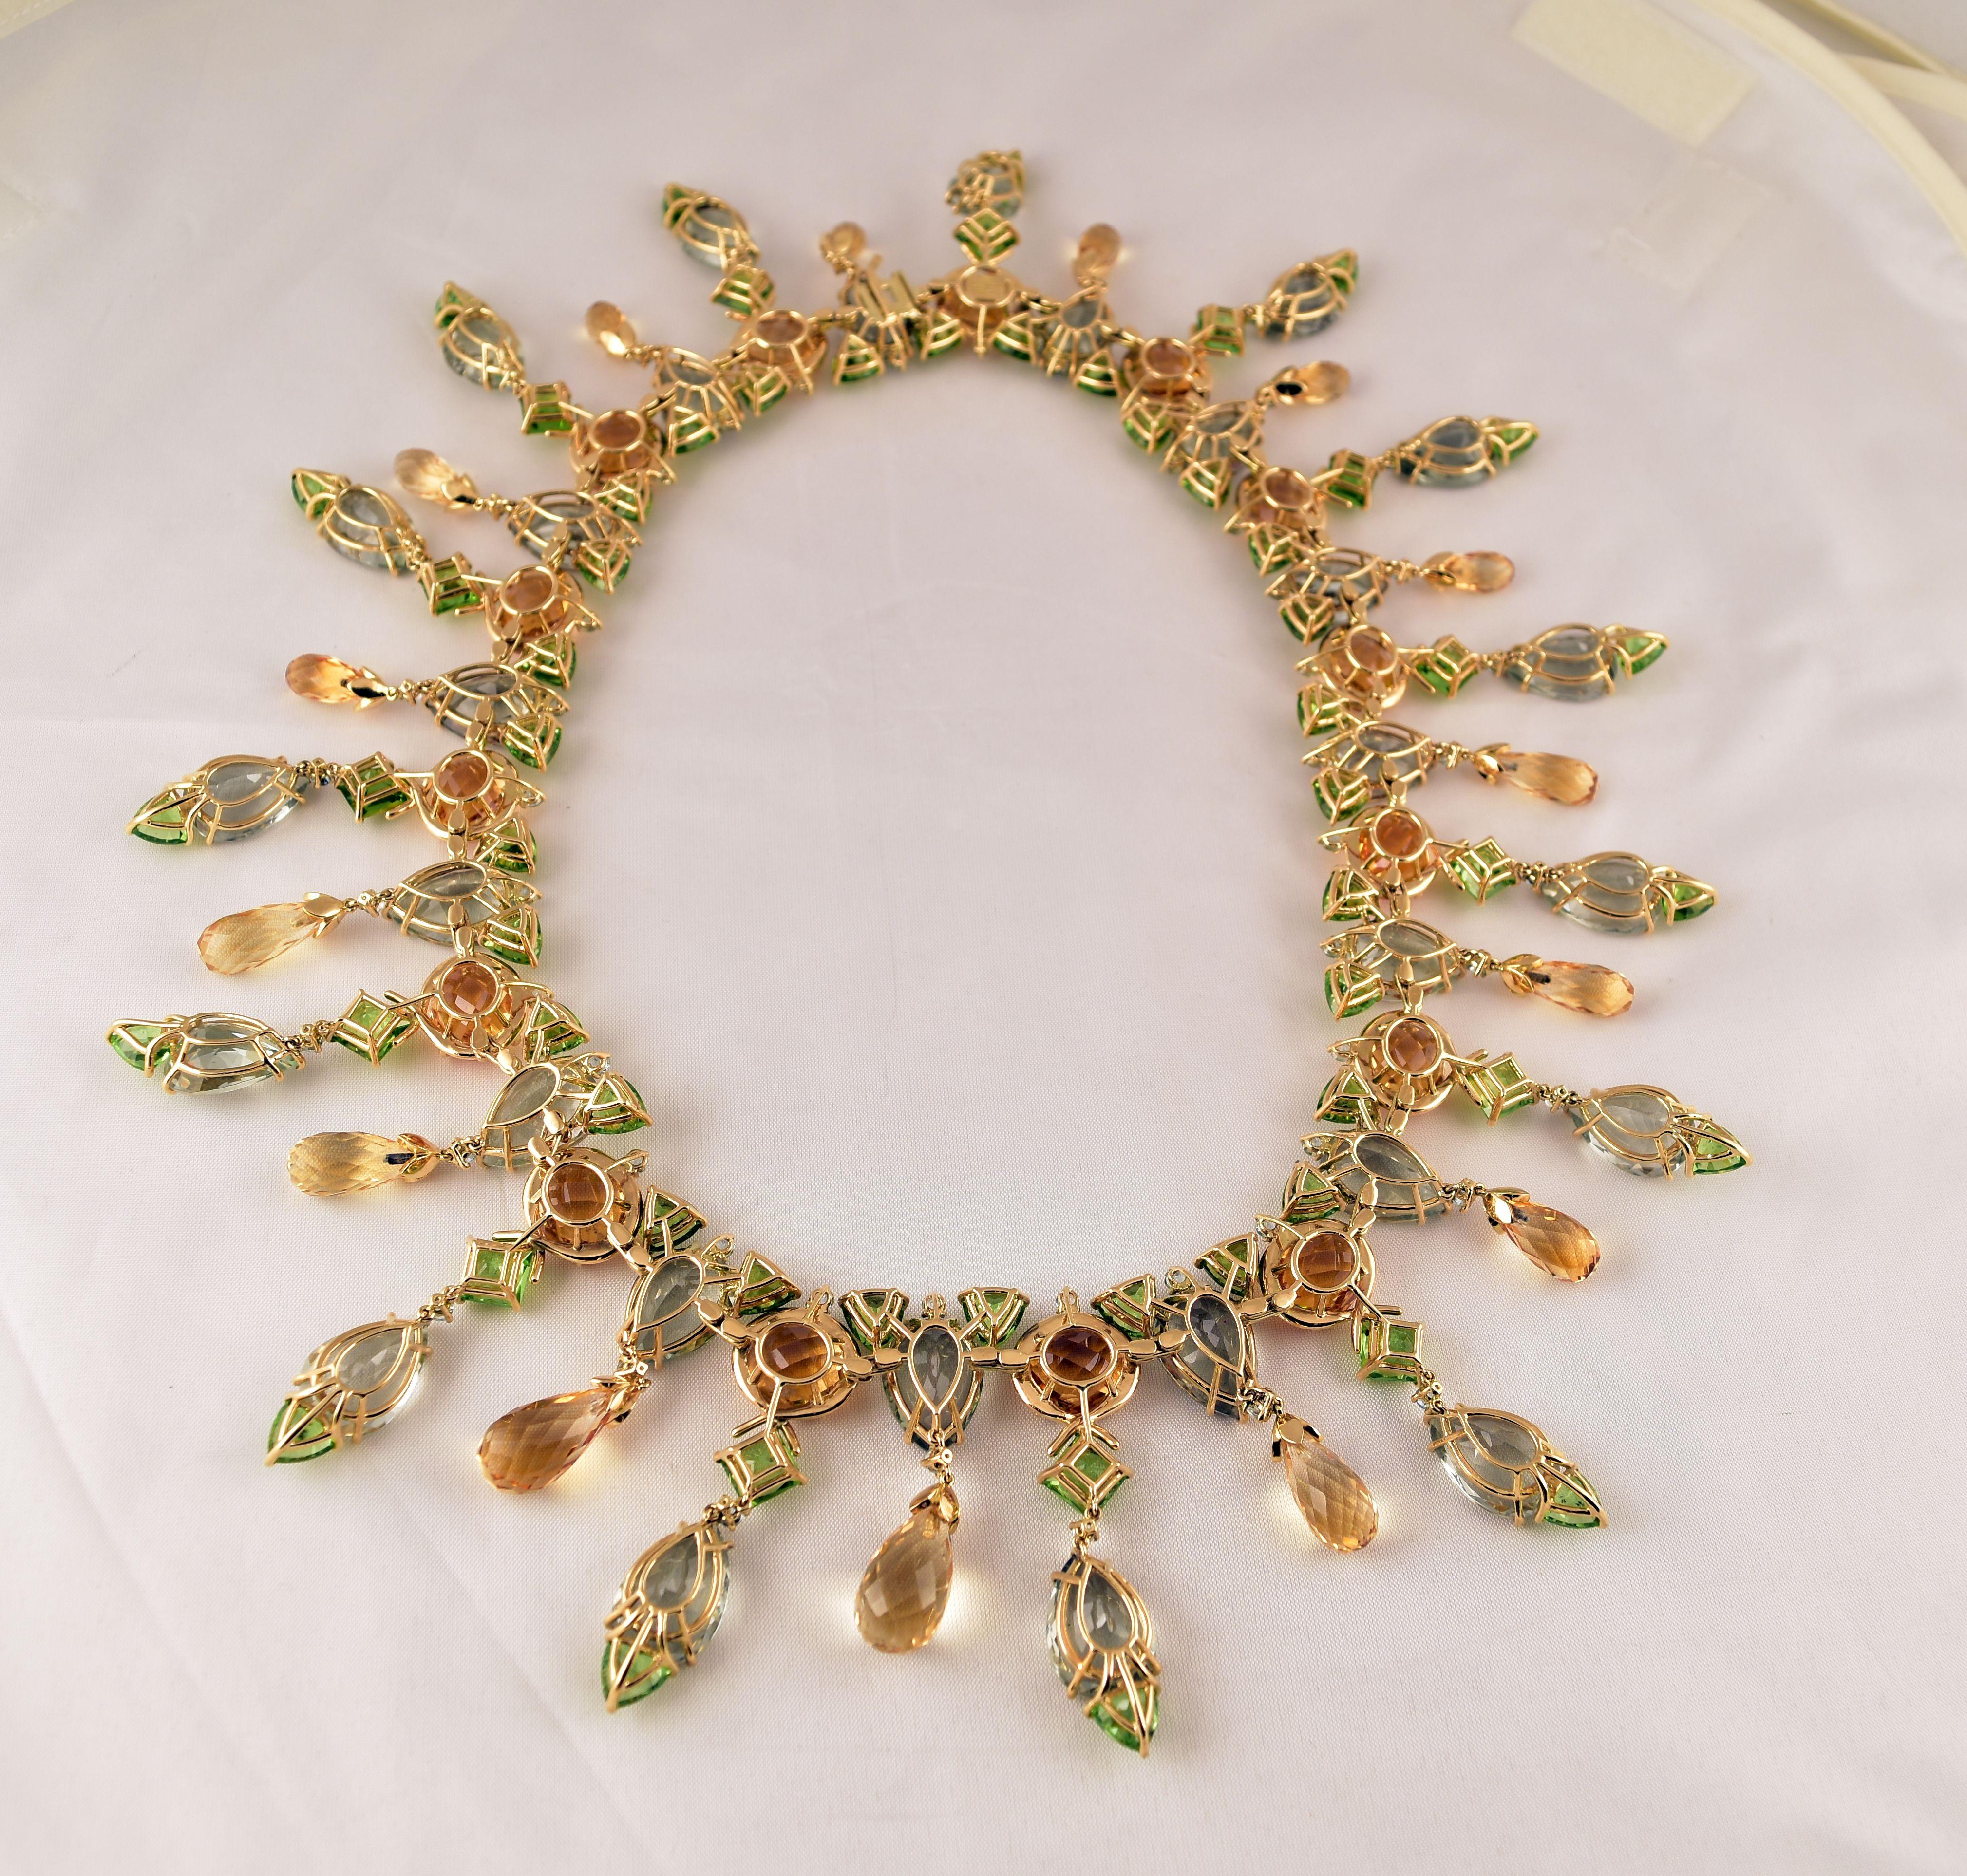 Simply Beautiful! Elegant and Finely detailed Peridot (app. 116.25 total Carat weight), Citrine (app. 245 total Carat weight), Green Amethyst (app. 270 total Carat weight) and Blue Zircon (app. 6.18 total Carat weight) Statement Necklace. Hand